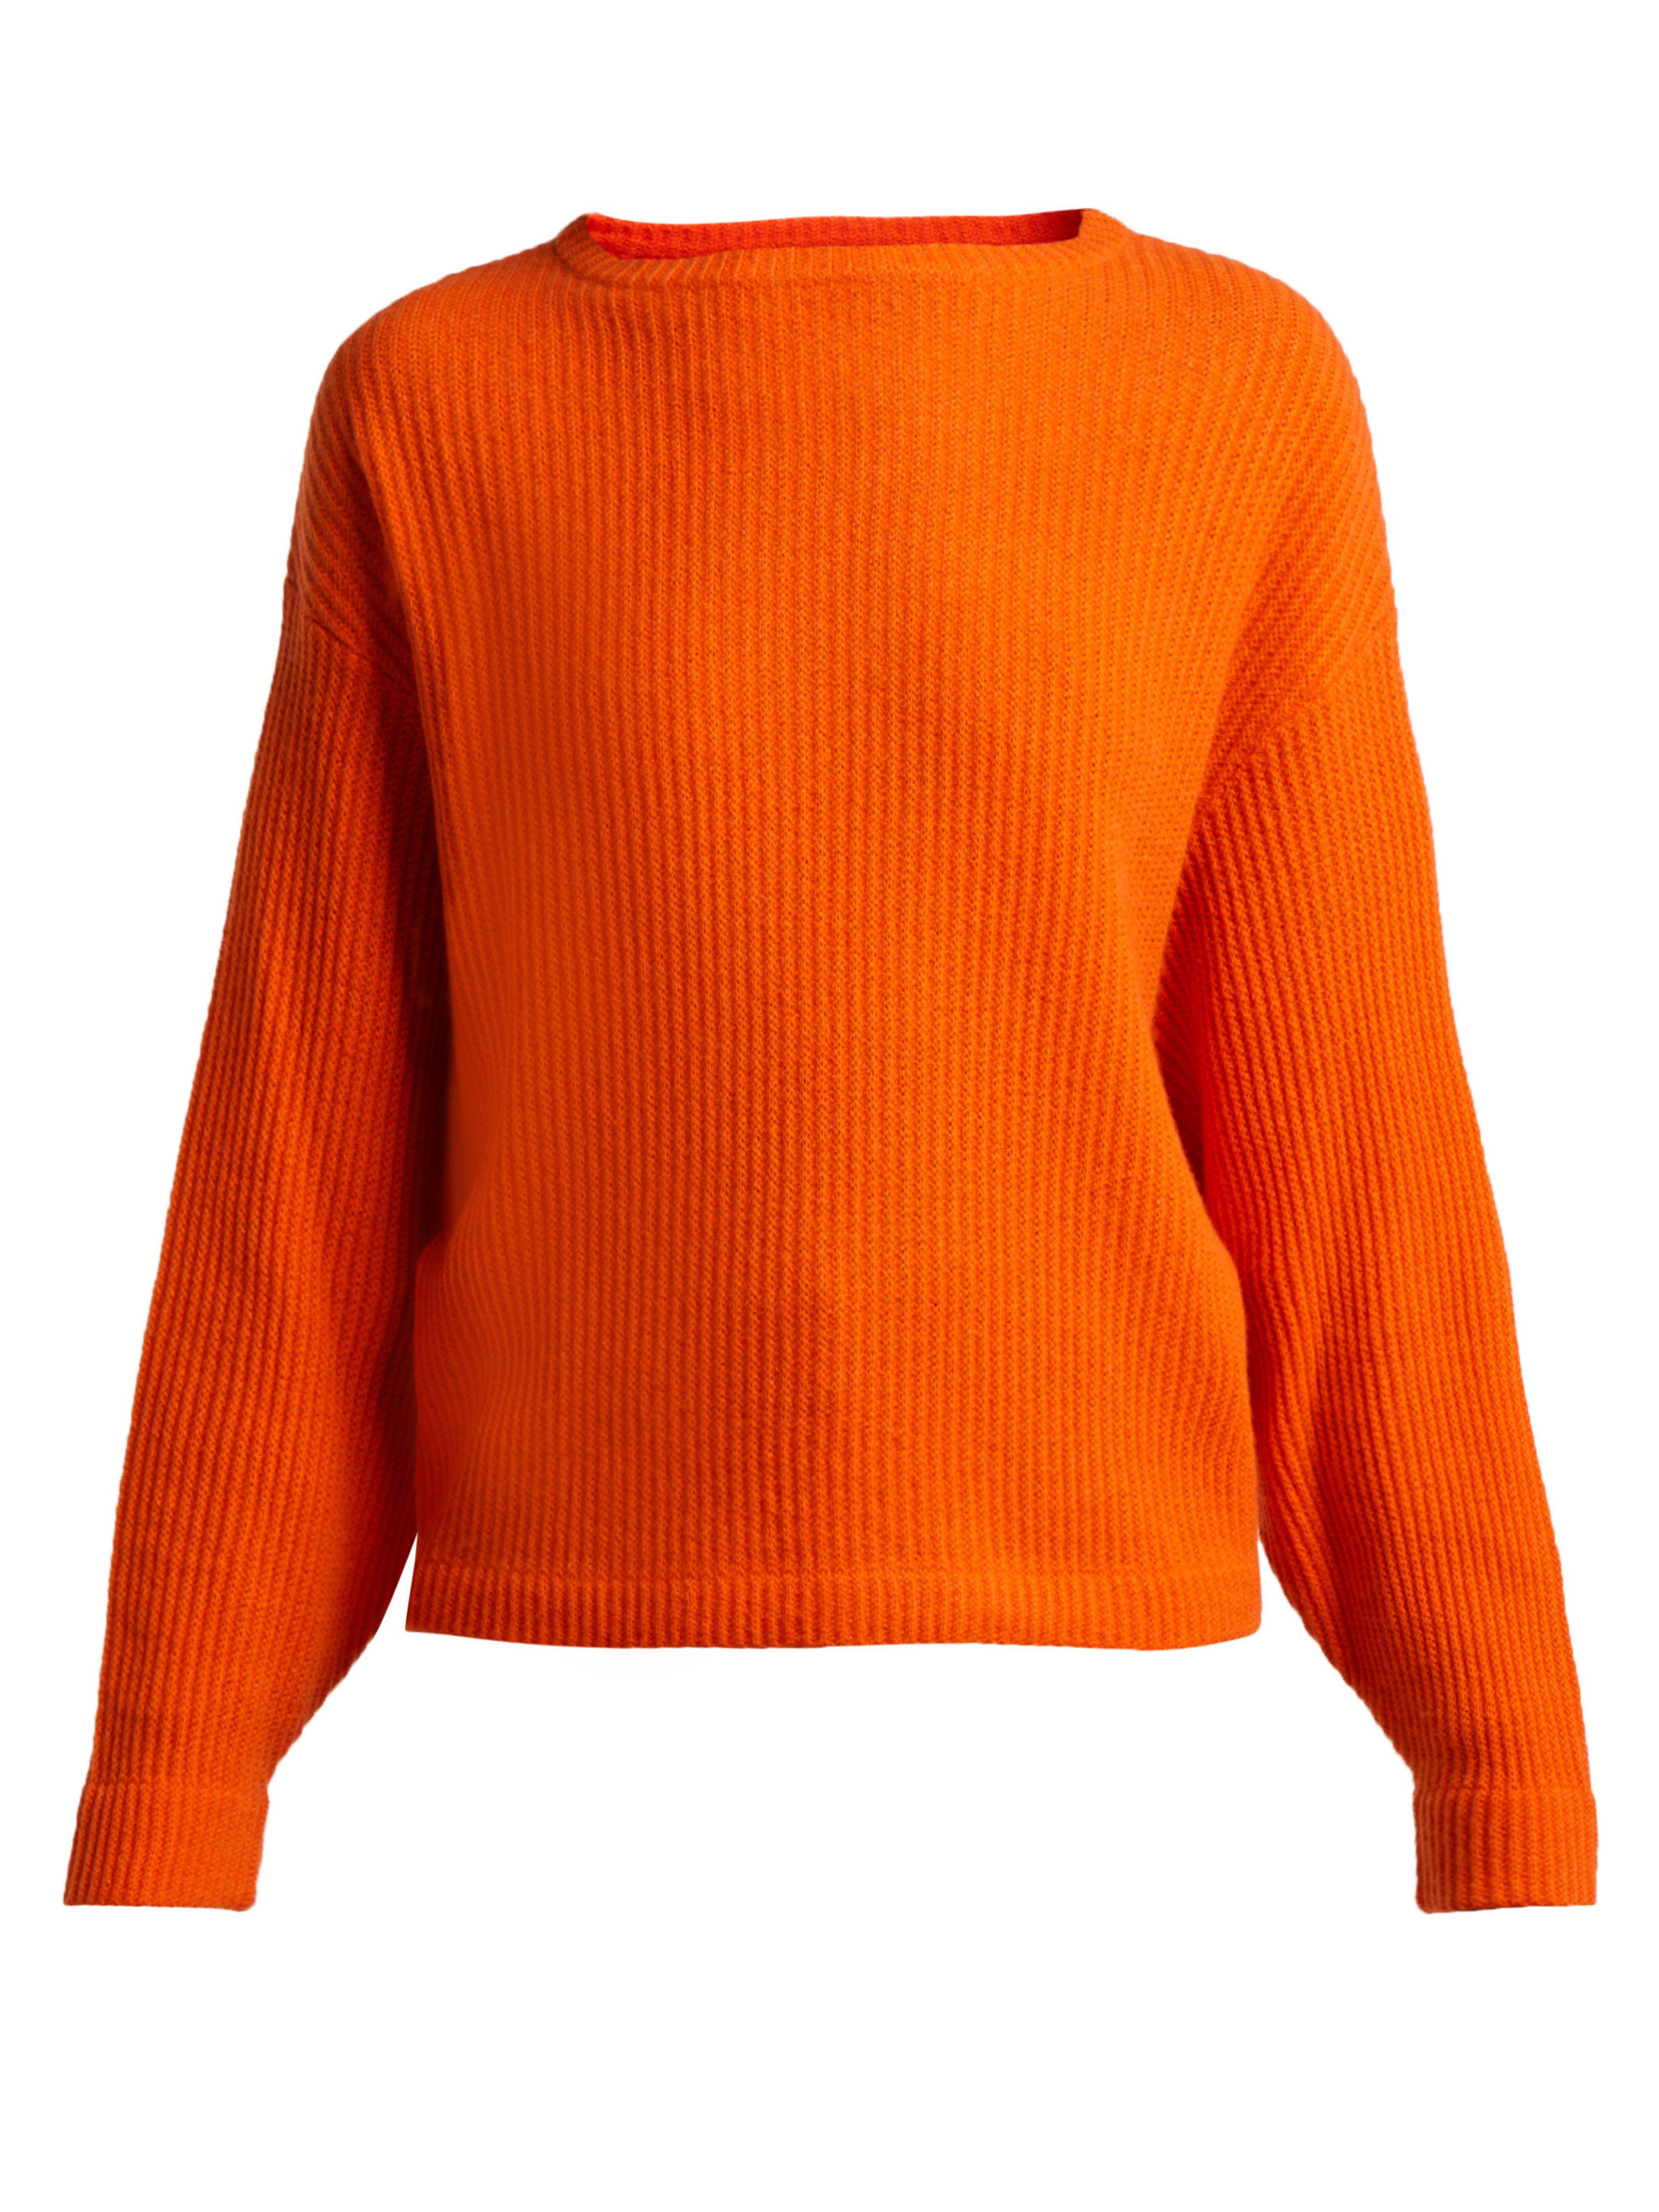 Allude Ribbed Cashmere Sweater in Orange - Lyst